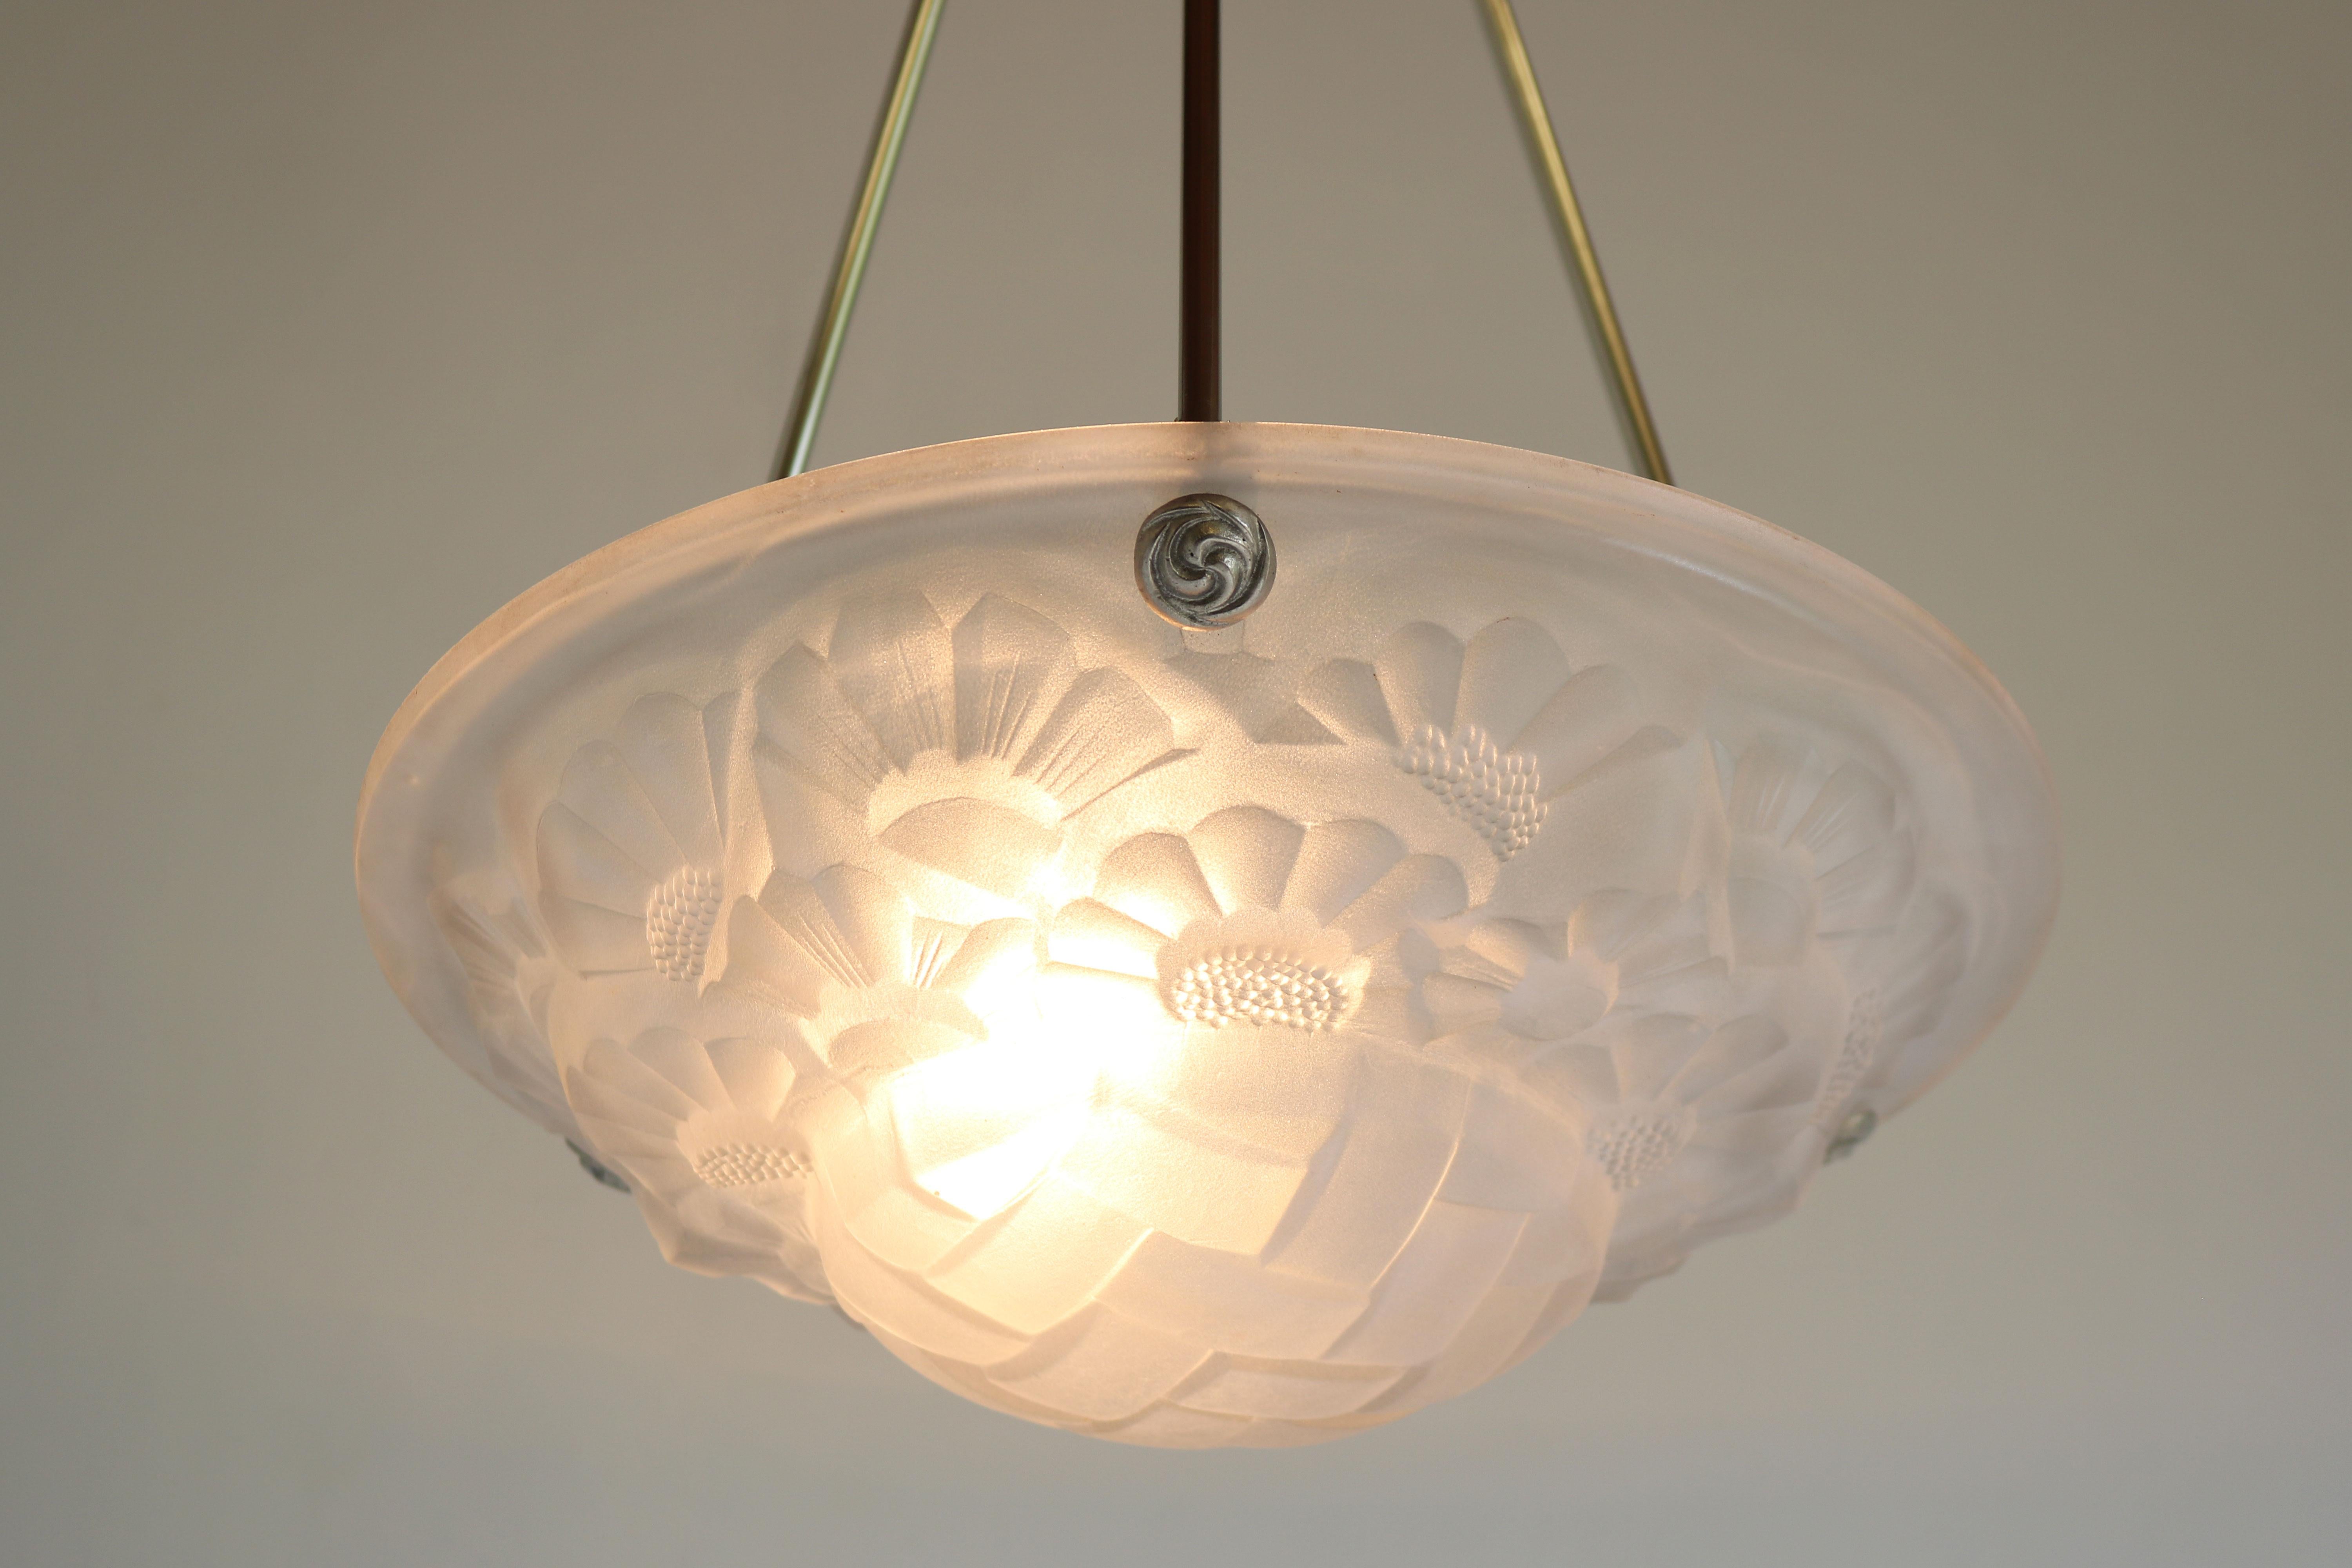 Gorgeous & timeless! This French Art Deco pendant by David Gueron Degue 1930.
Marvelous white frosted glass shade with floral Art Deco motives. 
The chandelier comes with the original suspension in silver with Art Deco decorations. 
Simply